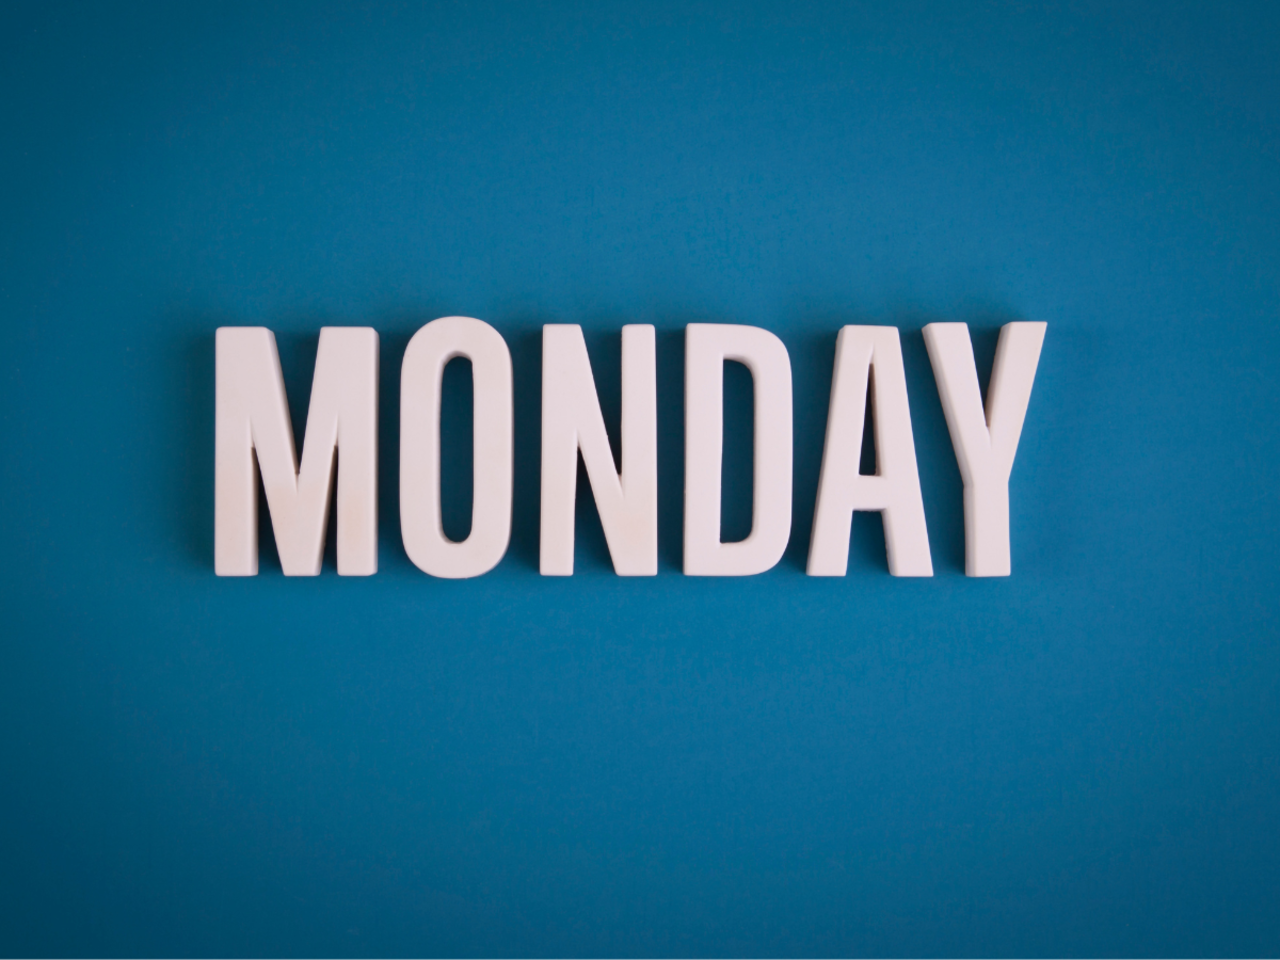 Monday officially declared as the worst day of the week by ...